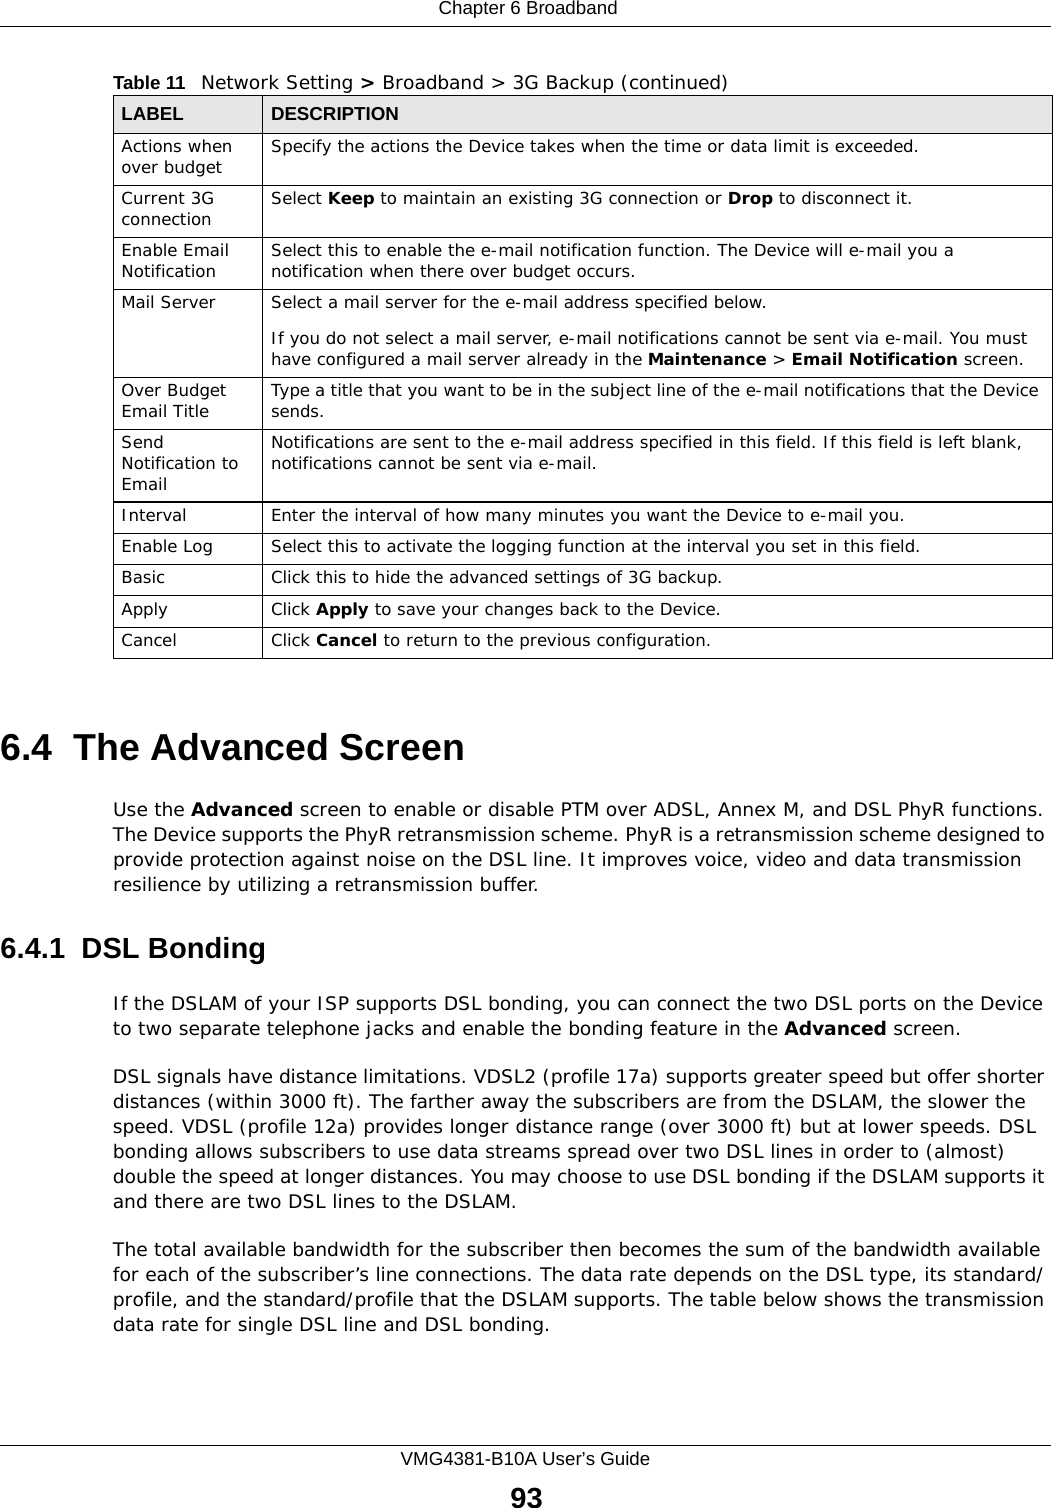  Chapter 6 BroadbandVMG4381-B10A User’s Guide936.4  The Advanced ScreenUse the Advanced screen to enable or disable PTM over ADSL, Annex M, and DSL PhyR functions. The Device supports the PhyR retransmission scheme. PhyR is a retransmission scheme designed to provide protection against noise on the DSL line. It improves voice, video and data transmission resilience by utilizing a retransmission buffer.6.4.1  DSL BondingIf the DSLAM of your ISP supports DSL bonding, you can connect the two DSL ports on the Device to two separate telephone jacks and enable the bonding feature in the Advanced screen.DSL signals have distance limitations. VDSL2 (profile 17a) supports greater speed but offer shorter distances (within 3000 ft). The farther away the subscribers are from the DSLAM, the slower the speed. VDSL (profile 12a) provides longer distance range (over 3000 ft) but at lower speeds. DSL bonding allows subscribers to use data streams spread over two DSL lines in order to (almost) double the speed at longer distances. You may choose to use DSL bonding if the DSLAM supports it and there are two DSL lines to the DSLAM. The total available bandwidth for the subscriber then becomes the sum of the bandwidth available for each of the subscriber’s line connections. The data rate depends on the DSL type, its standard/profile, and the standard/profile that the DSLAM supports. The table below shows the transmission data rate for single DSL line and DSL bonding.Actions when over budget Specify the actions the Device takes when the time or data limit is exceeded. Current 3G connection  Select Keep to maintain an existing 3G connection or Drop to disconnect it. Enable Email Notification  Select this to enable the e-mail notification function. The Device will e-mail you a notification when there over budget occurs.Mail Server Select a mail server for the e-mail address specified below. If you do not select a mail server, e-mail notifications cannot be sent via e-mail. You must have configured a mail server already in the Maintenance &gt; Email Notification screen.Over Budget Email Title Type a title that you want to be in the subject line of the e-mail notifications that the Device sends.Send Notification to EmailNotifications are sent to the e-mail address specified in this field. If this field is left blank, notifications cannot be sent via e-mail. Interval Enter the interval of how many minutes you want the Device to e-mail you.Enable Log Select this to activate the logging function at the interval you set in this field. Basic Click this to hide the advanced settings of 3G backup.Apply Click Apply to save your changes back to the Device.Cancel Click Cancel to return to the previous configuration.Table 11   Network Setting &gt; Broadband &gt; 3G Backup (continued)LABEL DESCRIPTION